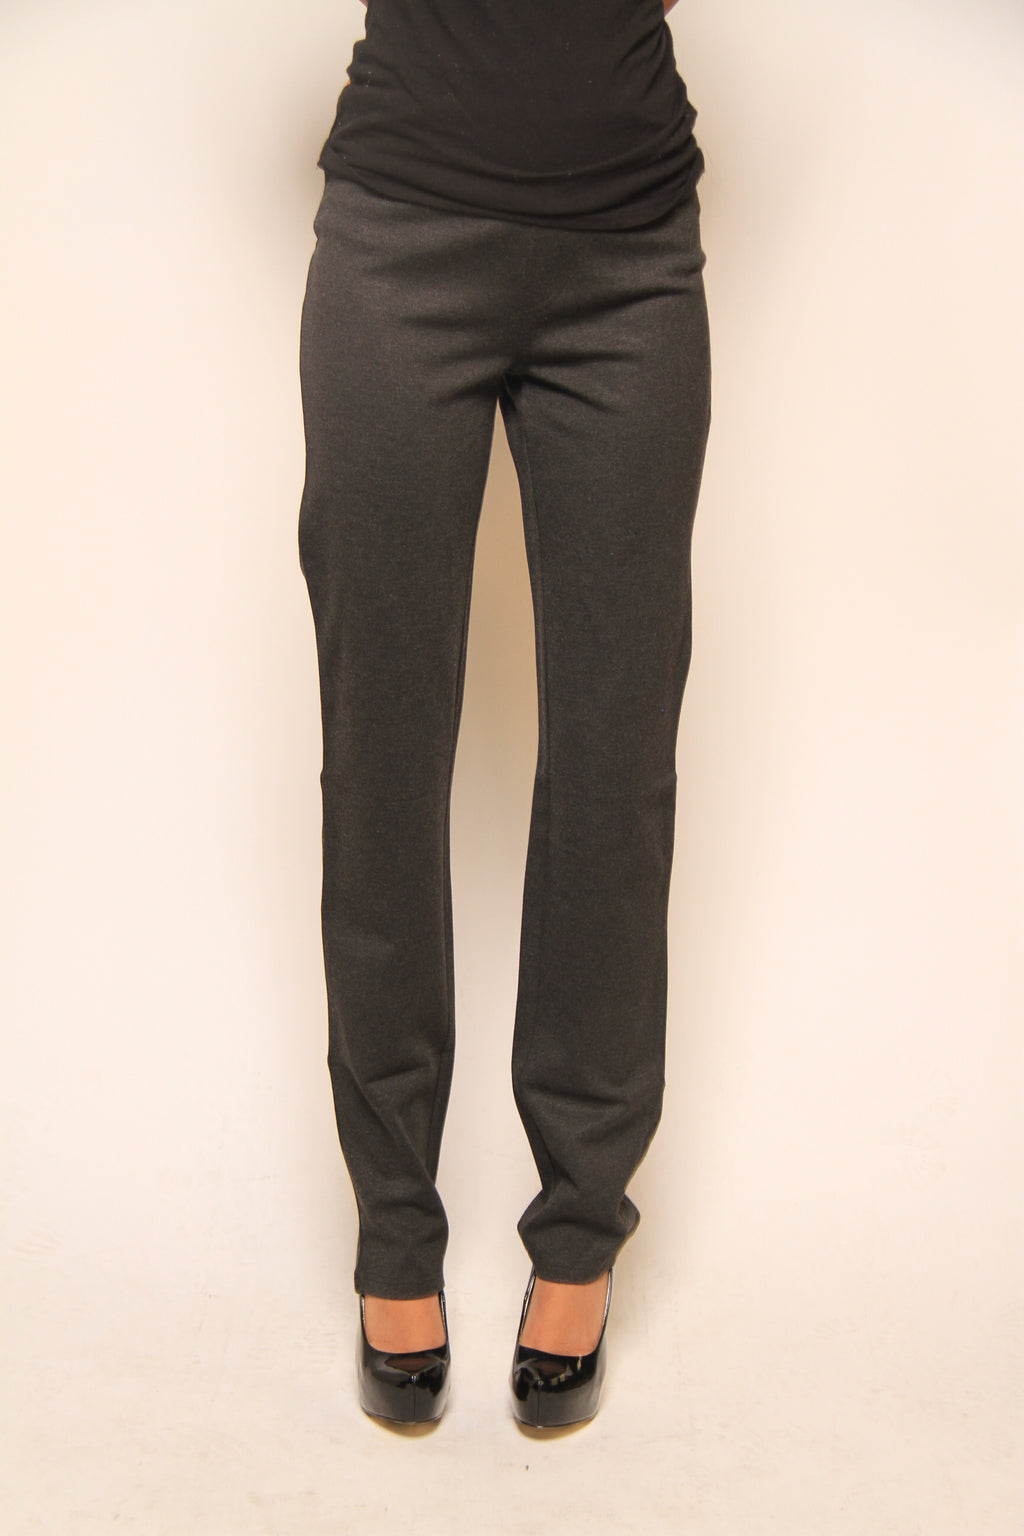 Dress Pants With Two Back Pockets And Elastic Waist Regular Fit